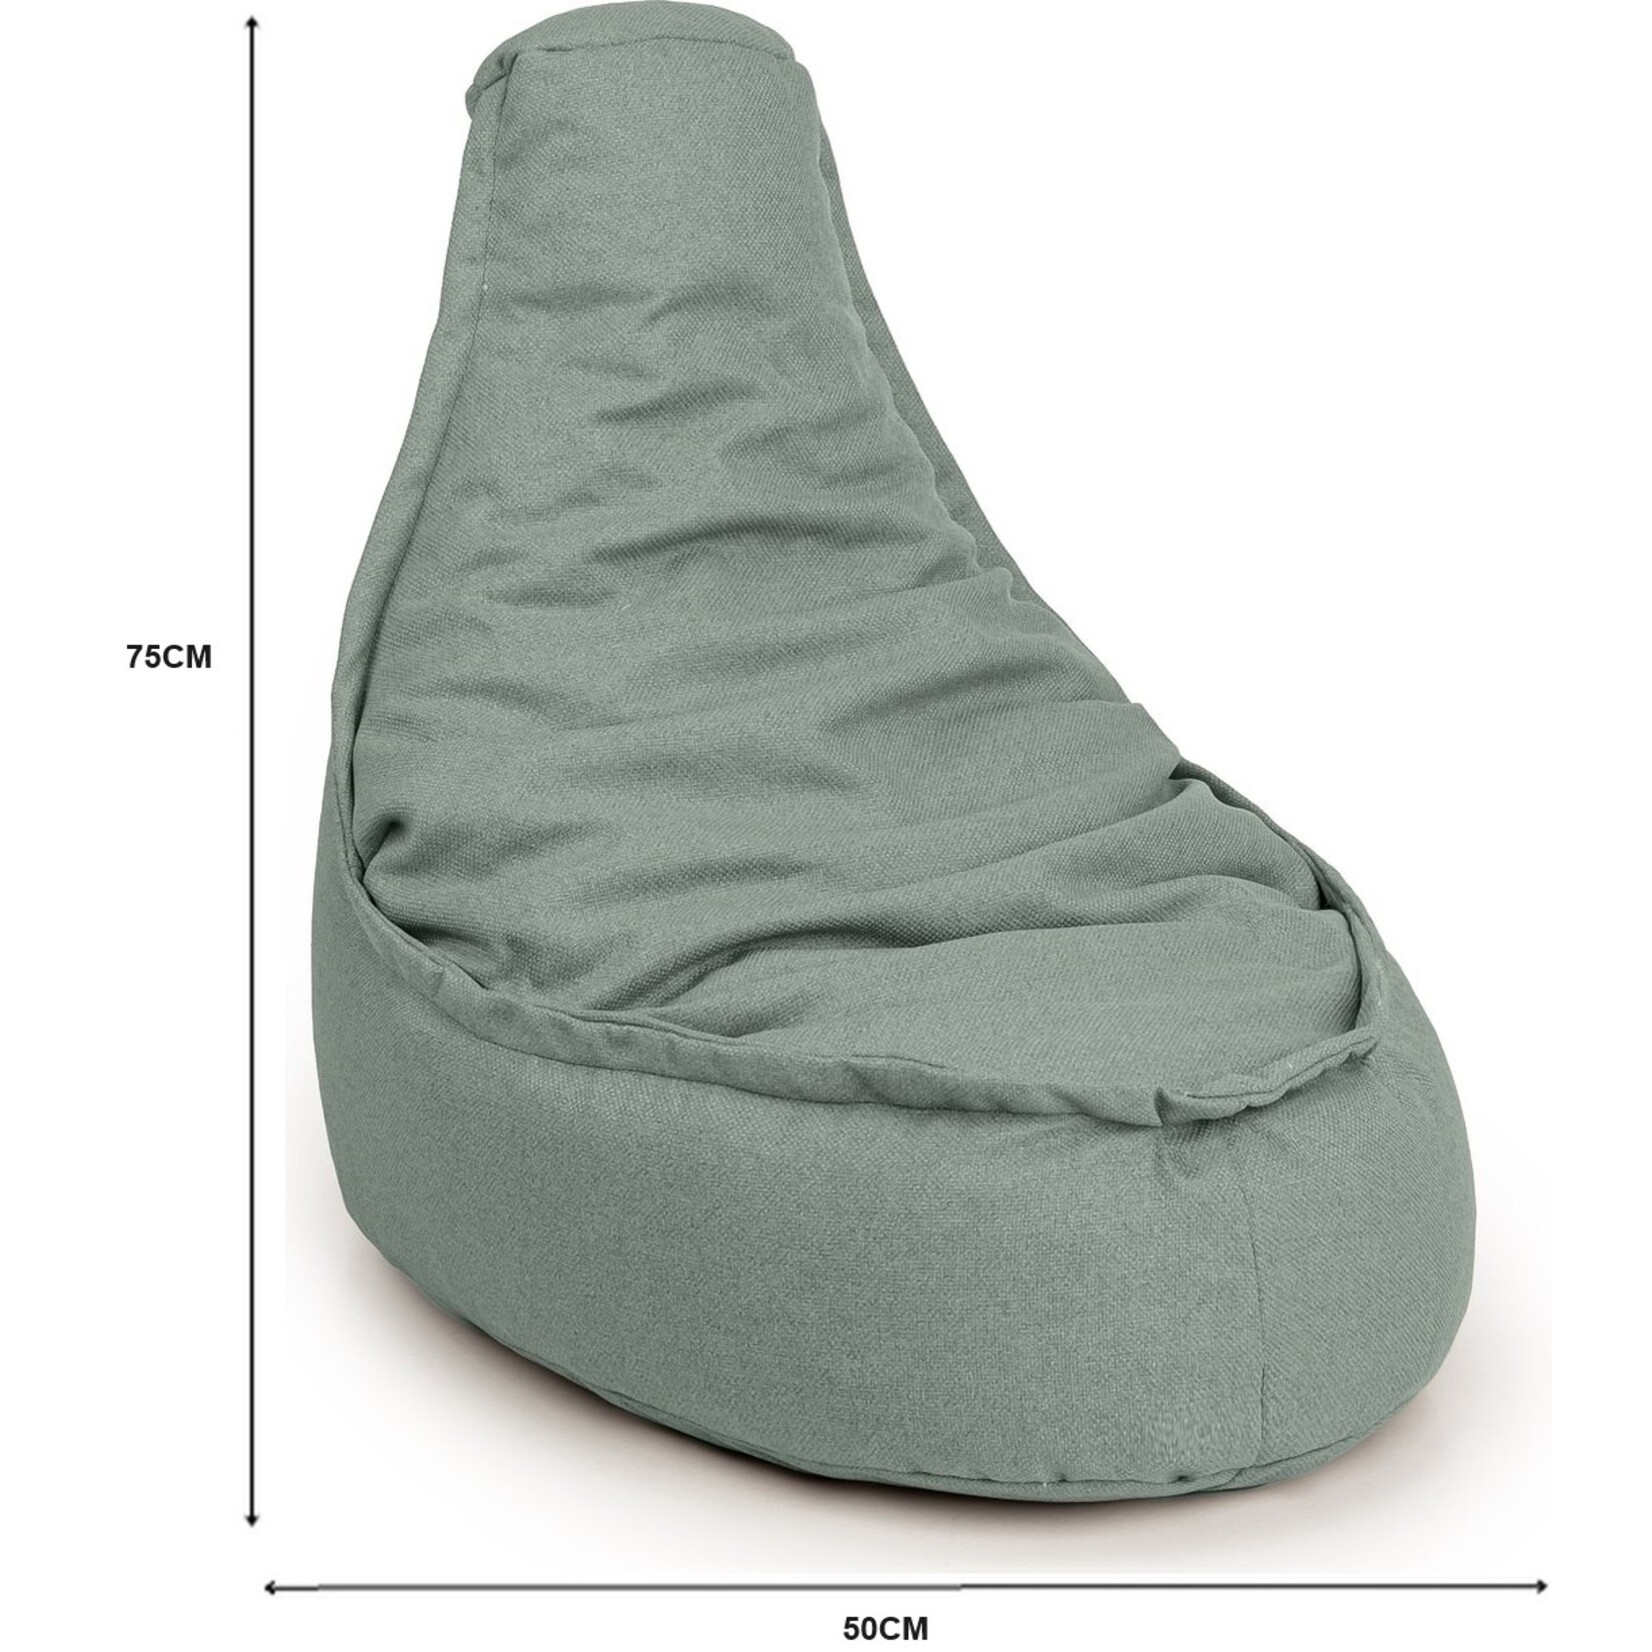 Bobbel Home Bobbel Home - Beanbag Chair Shape - Milano - Durable - Beanbag - 98% Recycled Pet Bottles - 100 Liters - For Indoor and Outdoor - Junior - Water Repellent - Light Green